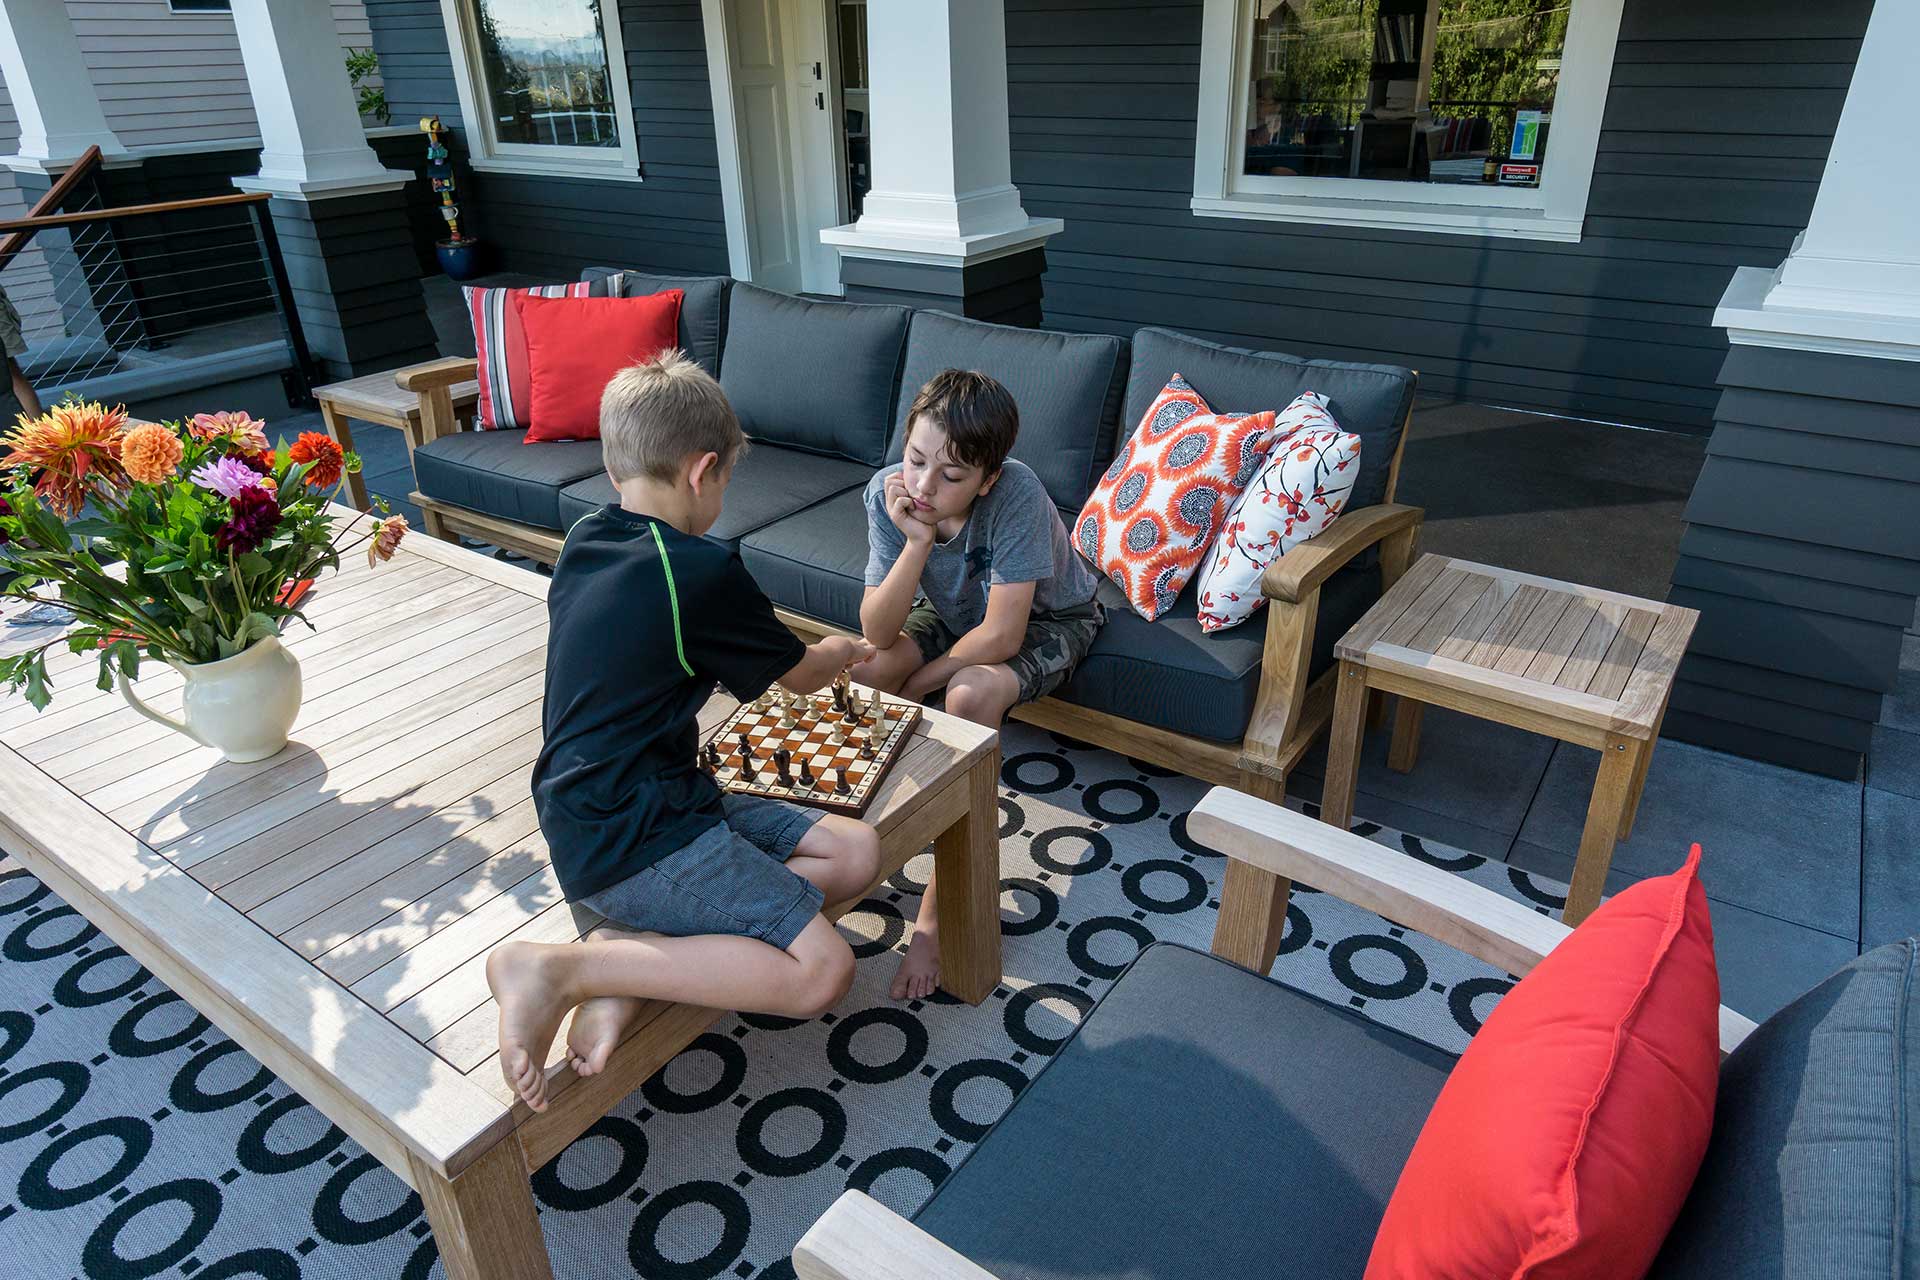 The new terrace at the Family Porch provides a space to gather and socialize.